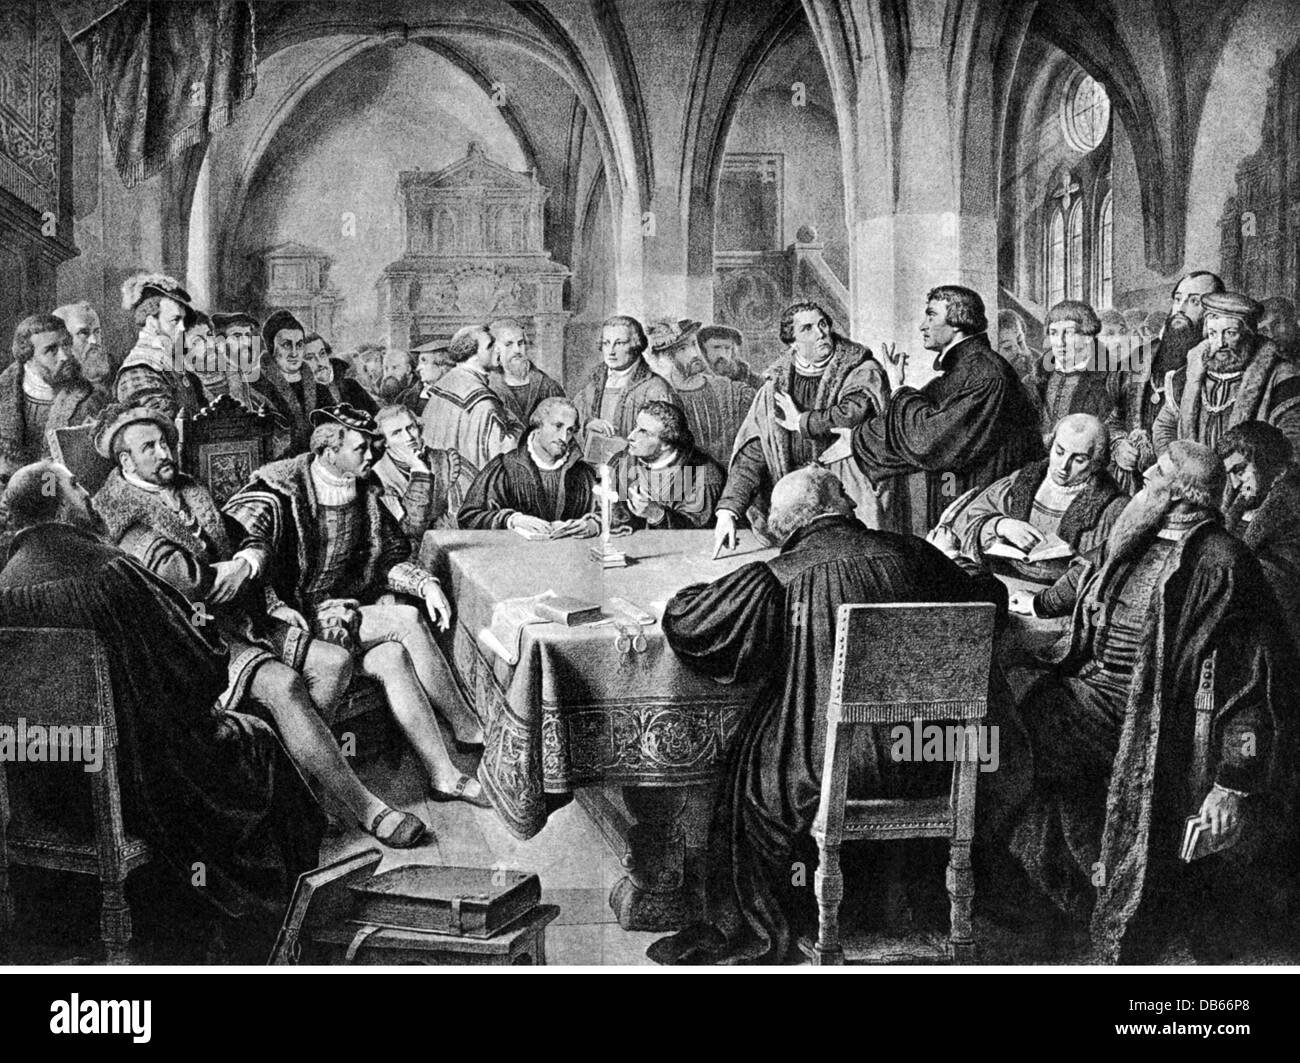 events, Protestant Reformation, 1517 - 1555, Marburg Colloquy, October 1529, lithograph based on painting by August Noack, Additional-Rights-Clearences-Not Available Stock Photo